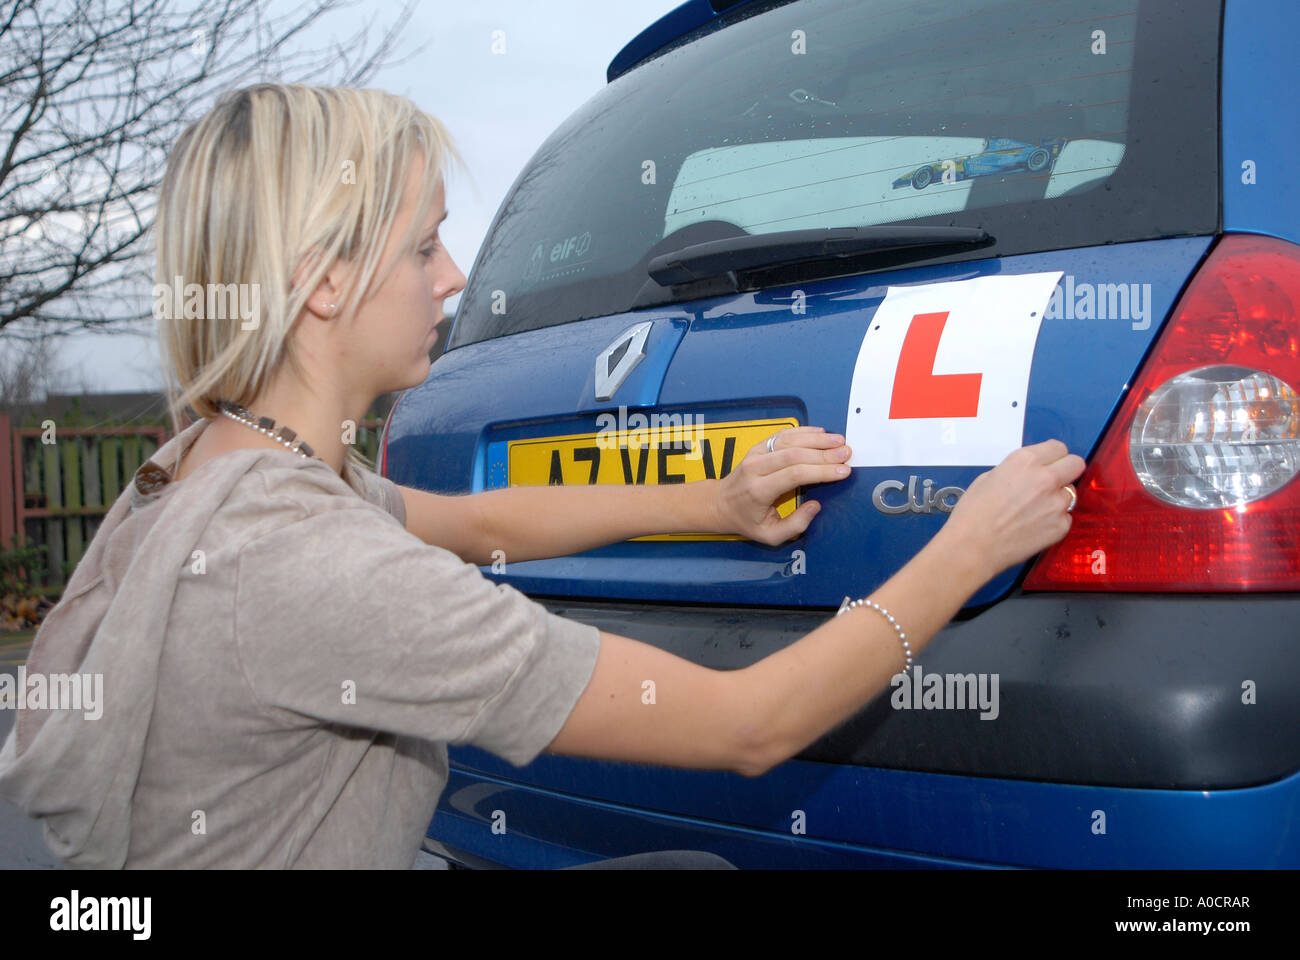 Girl fixing L plate to her car Stock Photo